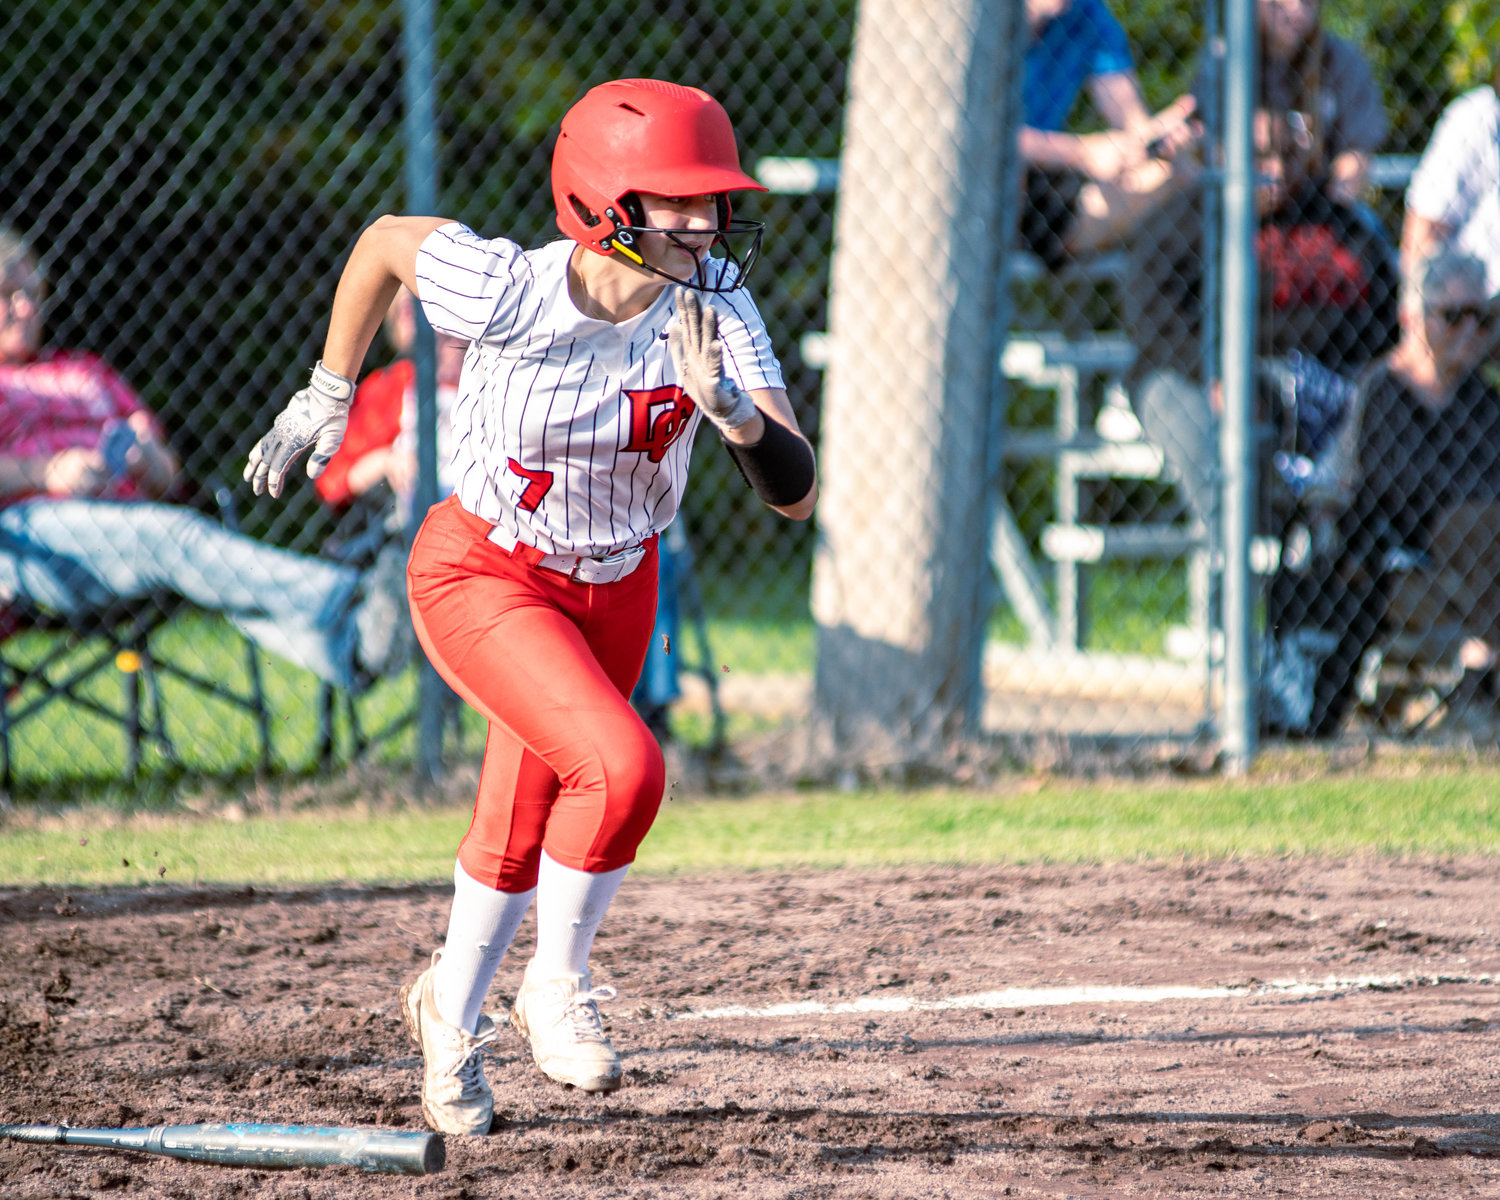 KYNNLEE GrAVES recorded an RBI in in all three games against Rison, Dumas, and McGehee. Graves was 3 for 10 in the three contests, scoring two runs.